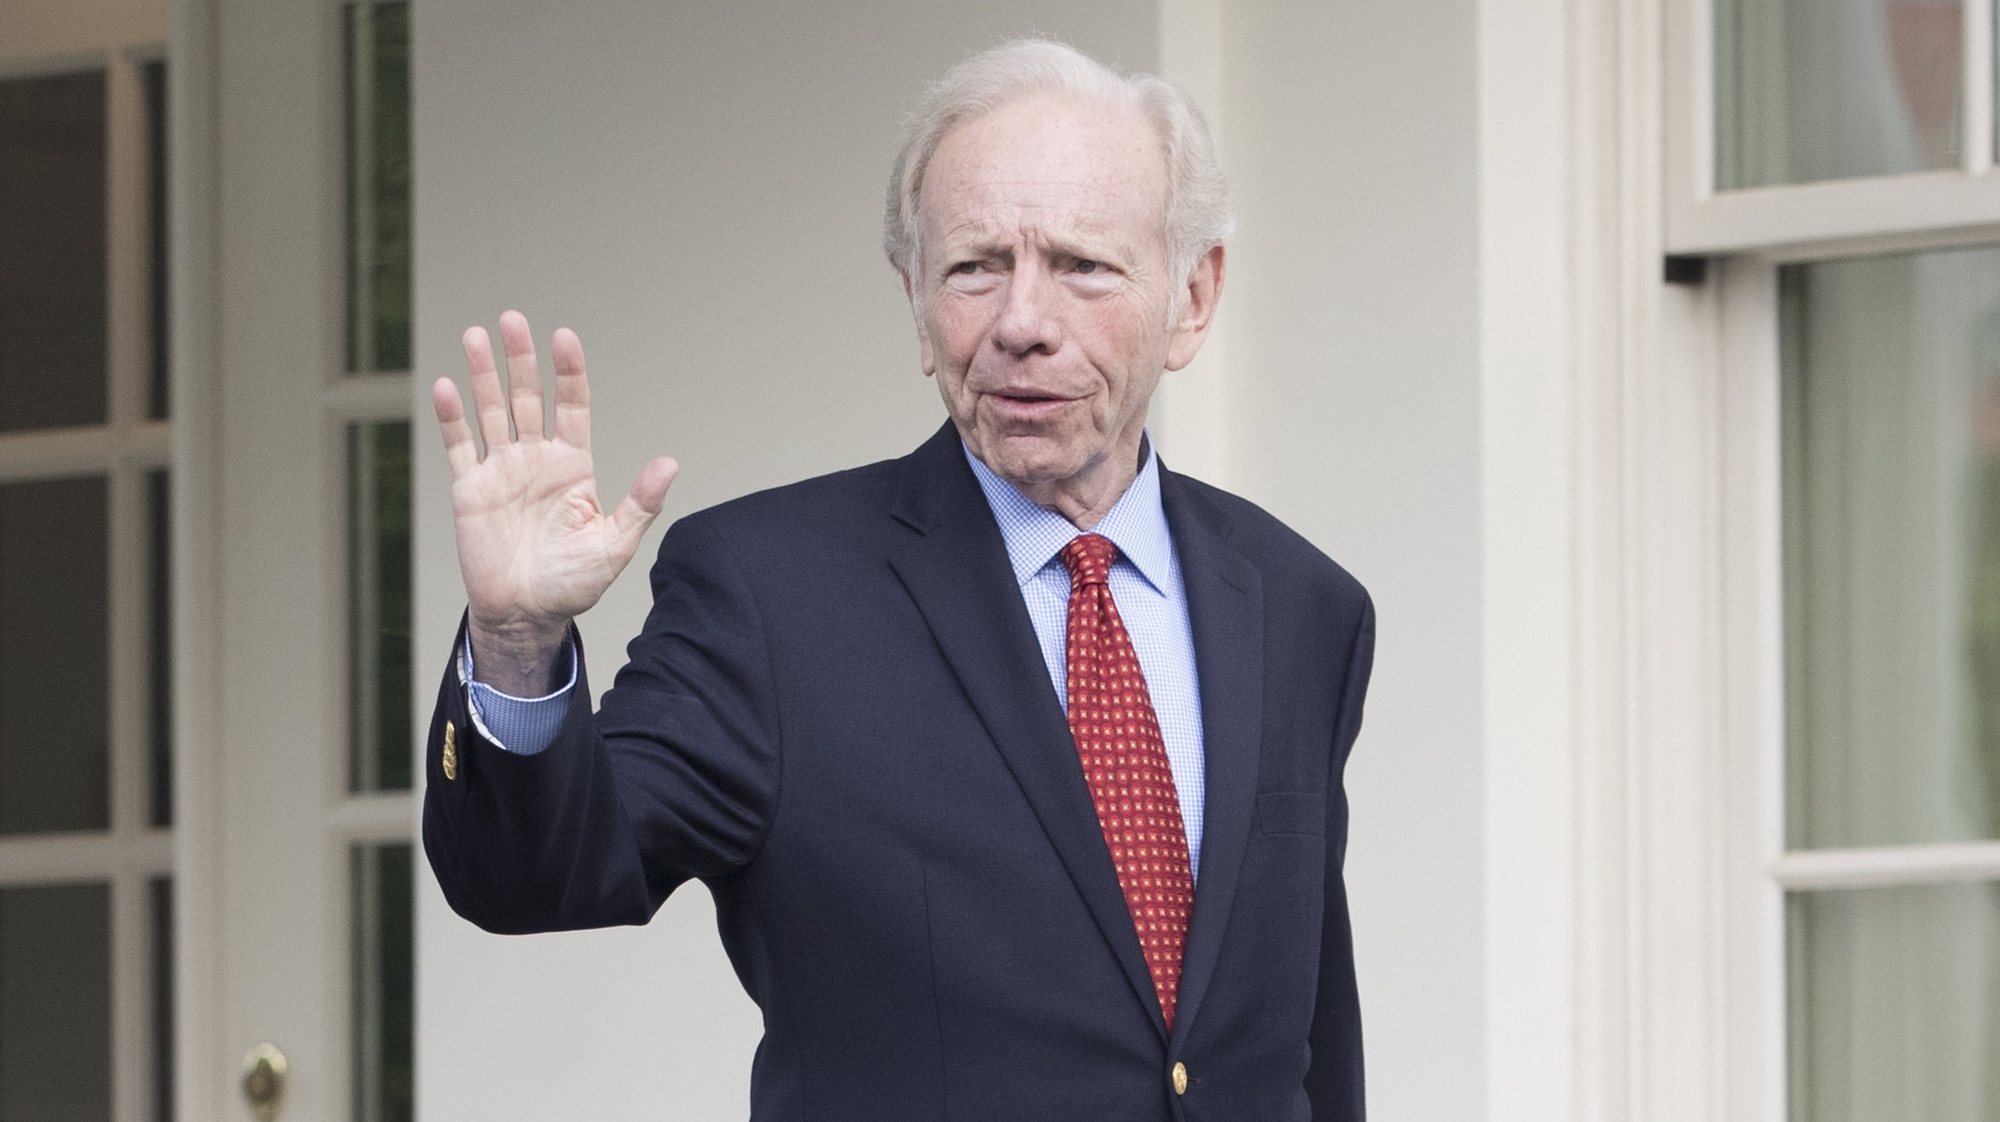 epa05970921 Former Senator from Connecticut Joe Lieberman walks out of the West Wing of the White House following a meeting with US President Donald J. Trump (not pictured), in Washington, DC, USA, 17 May 2017. Lieberman is one of four candidates for the position of Director of the FBI that are meeting with Trump on 17 May. Trump has faced bipartisan criticism in firing former FBI Director James Comey.  EPA/MICHAEL REYNOLDS